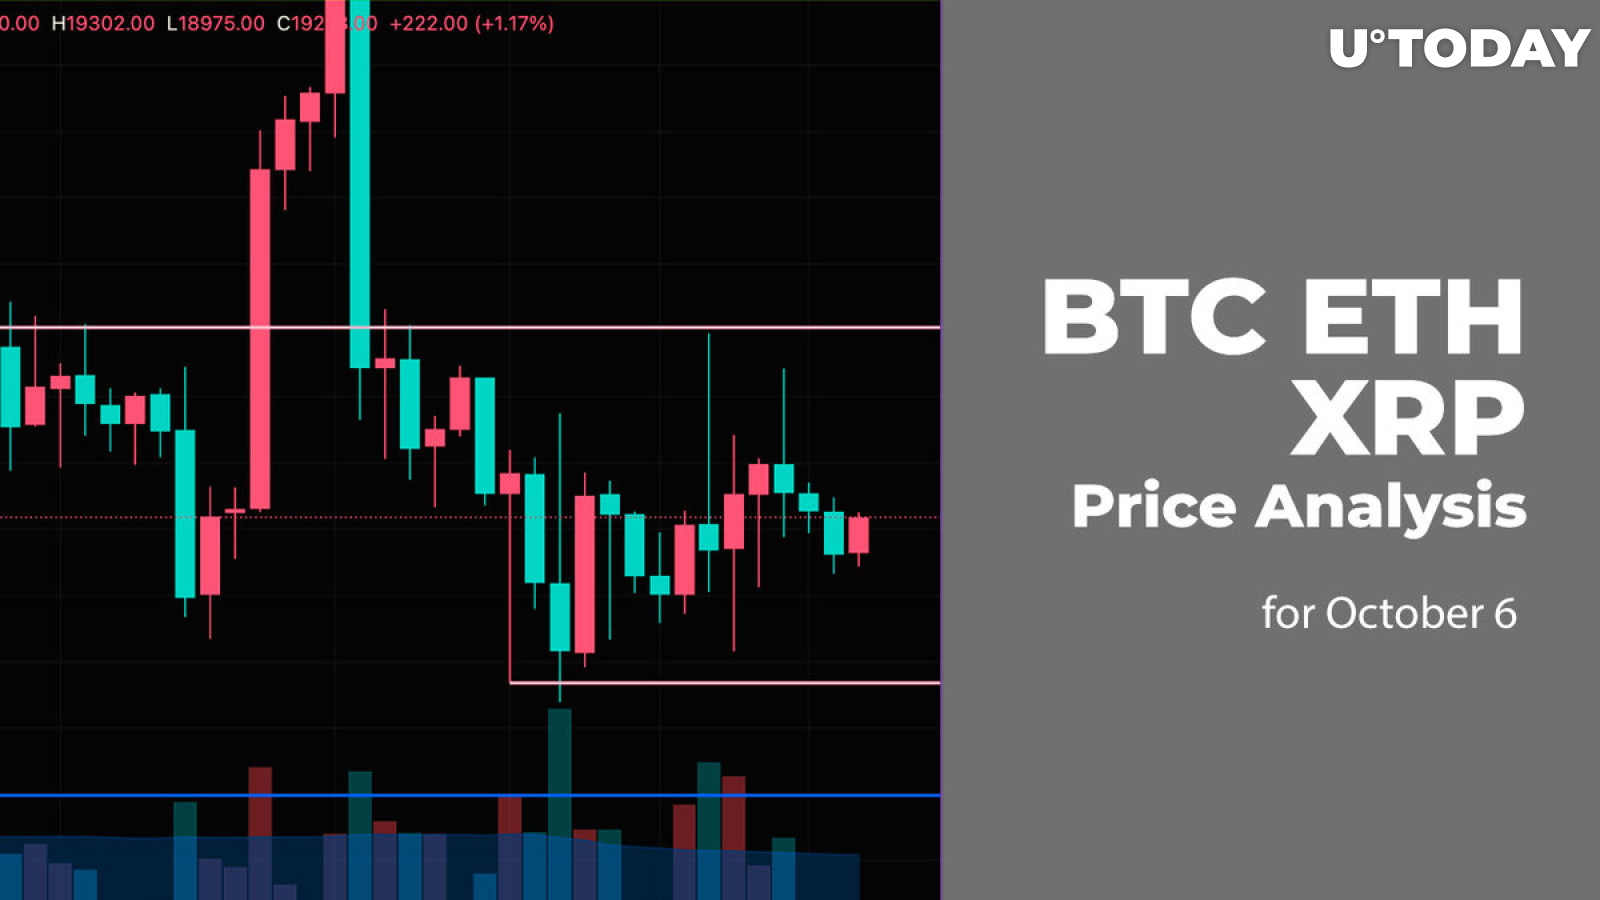 BTC, ETH and XRP Price Analysis for October 6